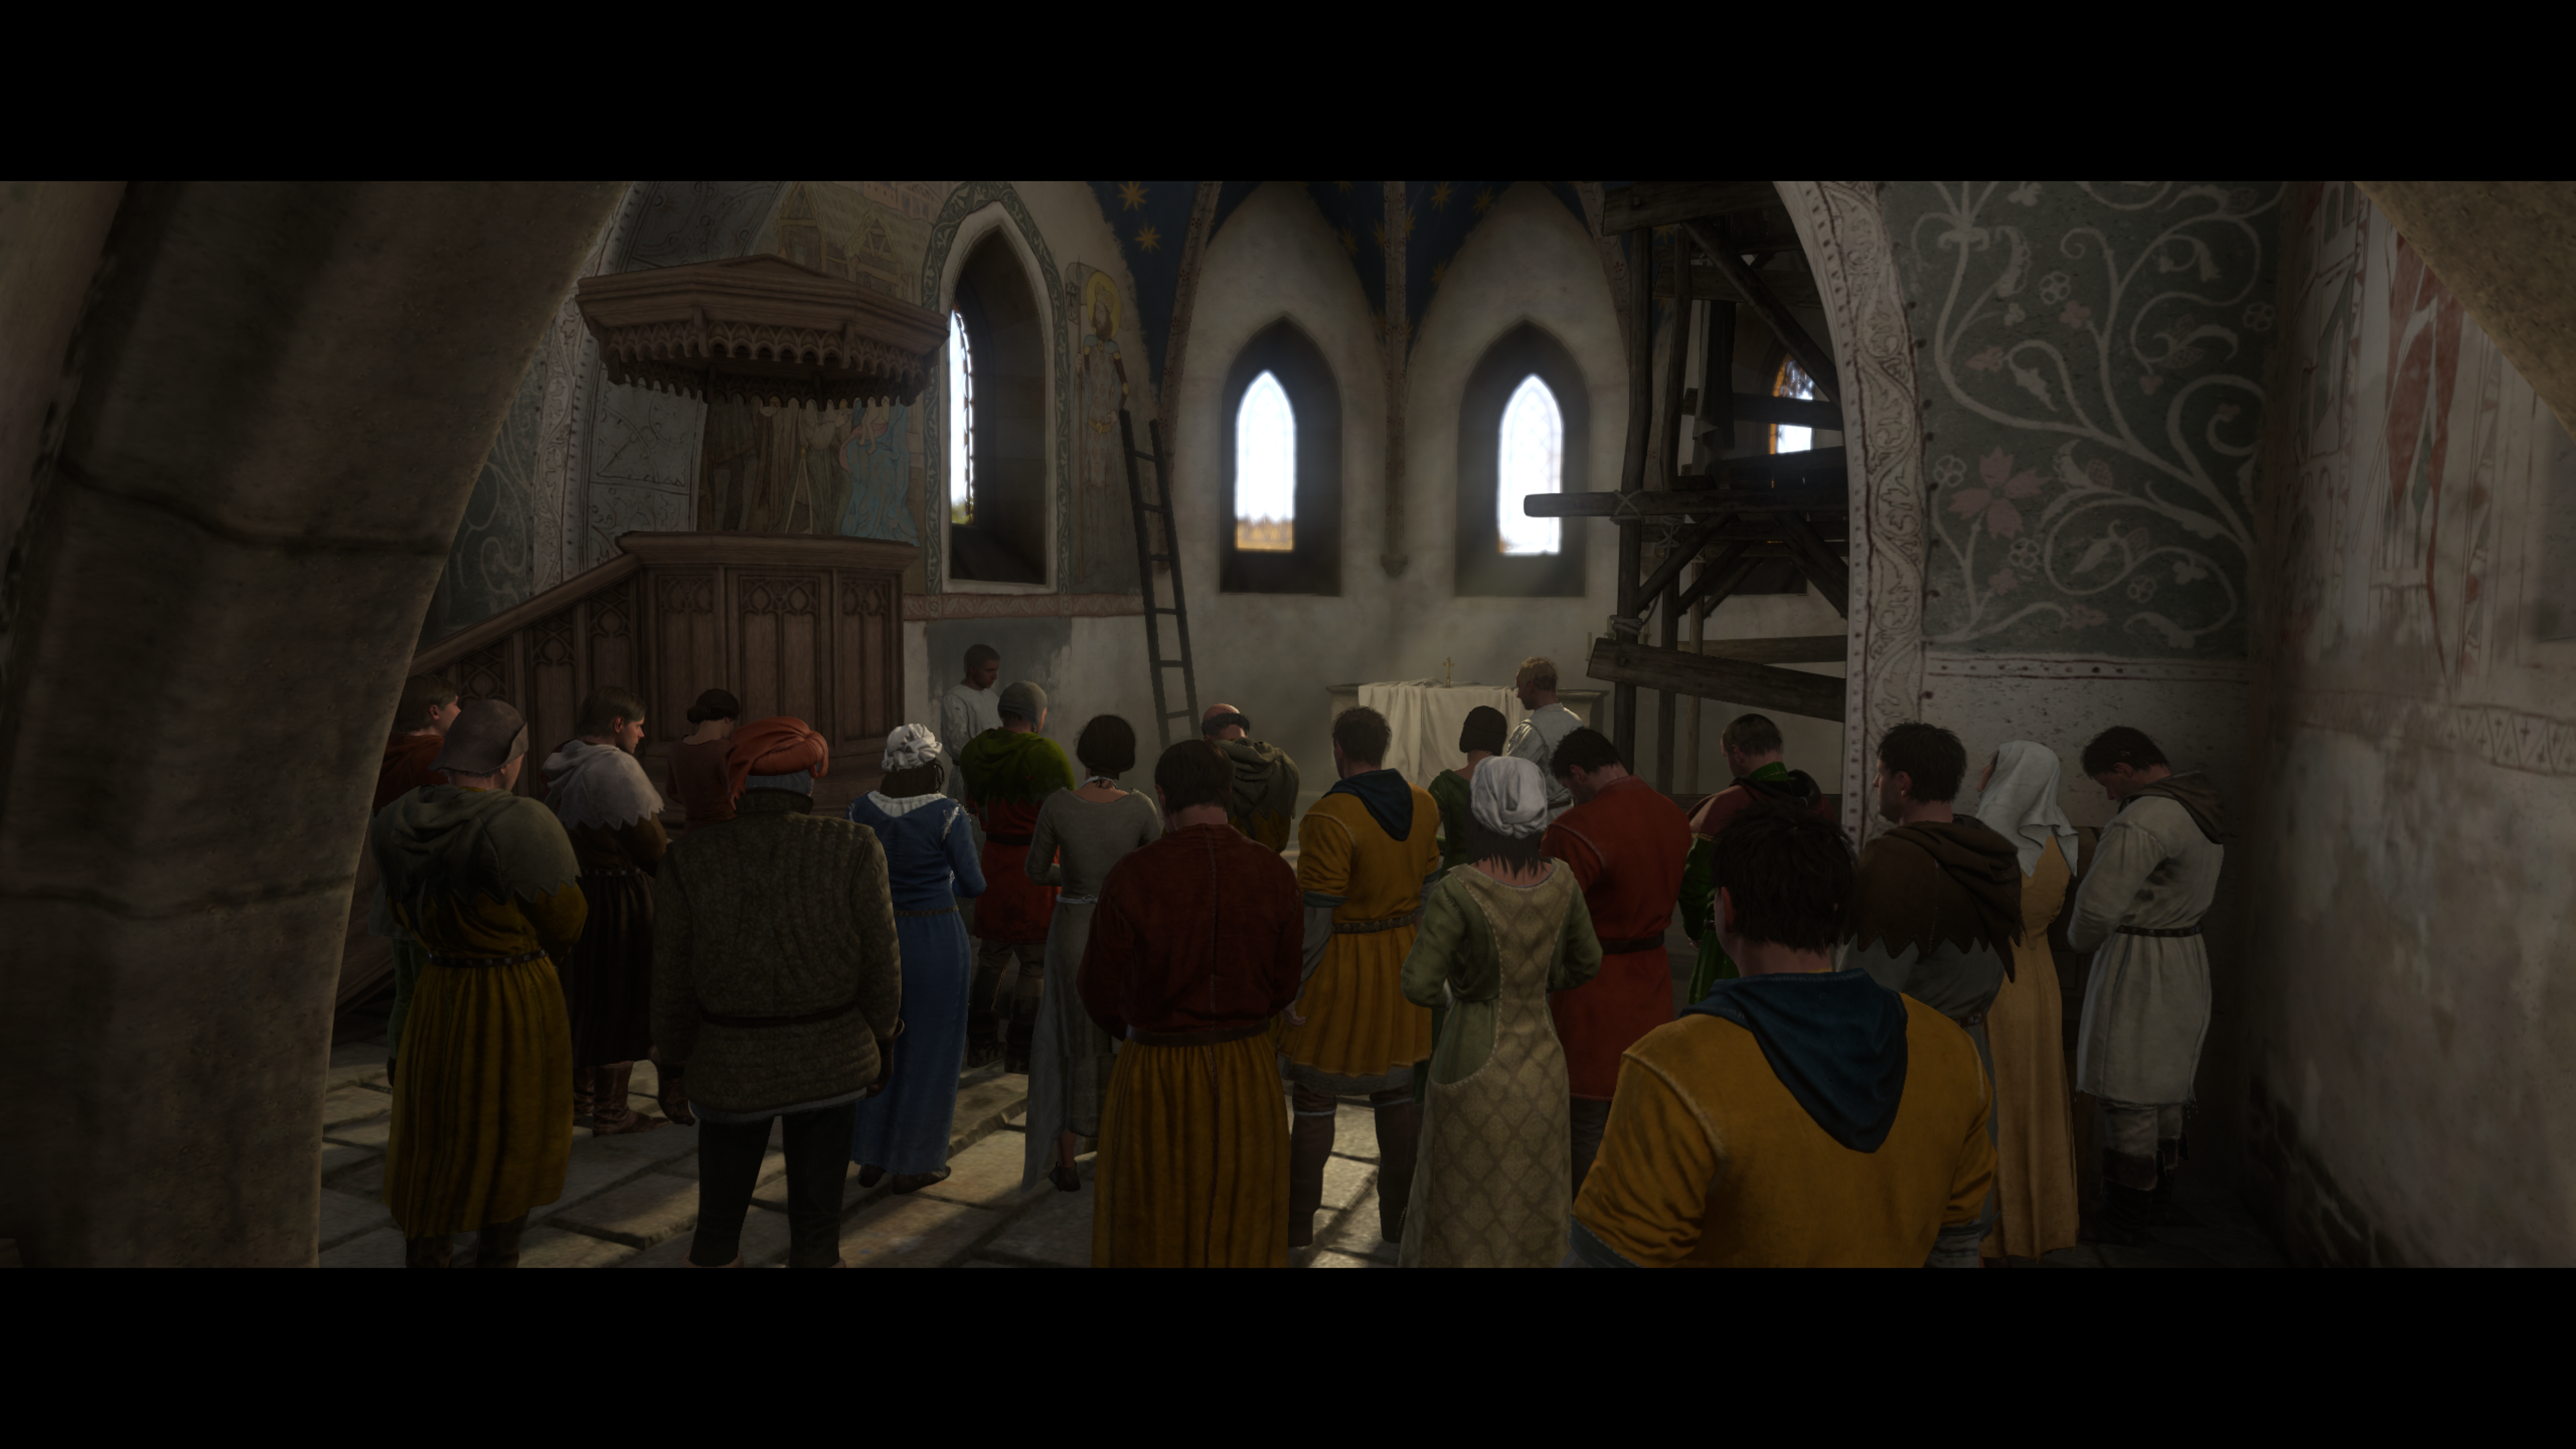 Gathering of people in Kingdom Come: Deliverance